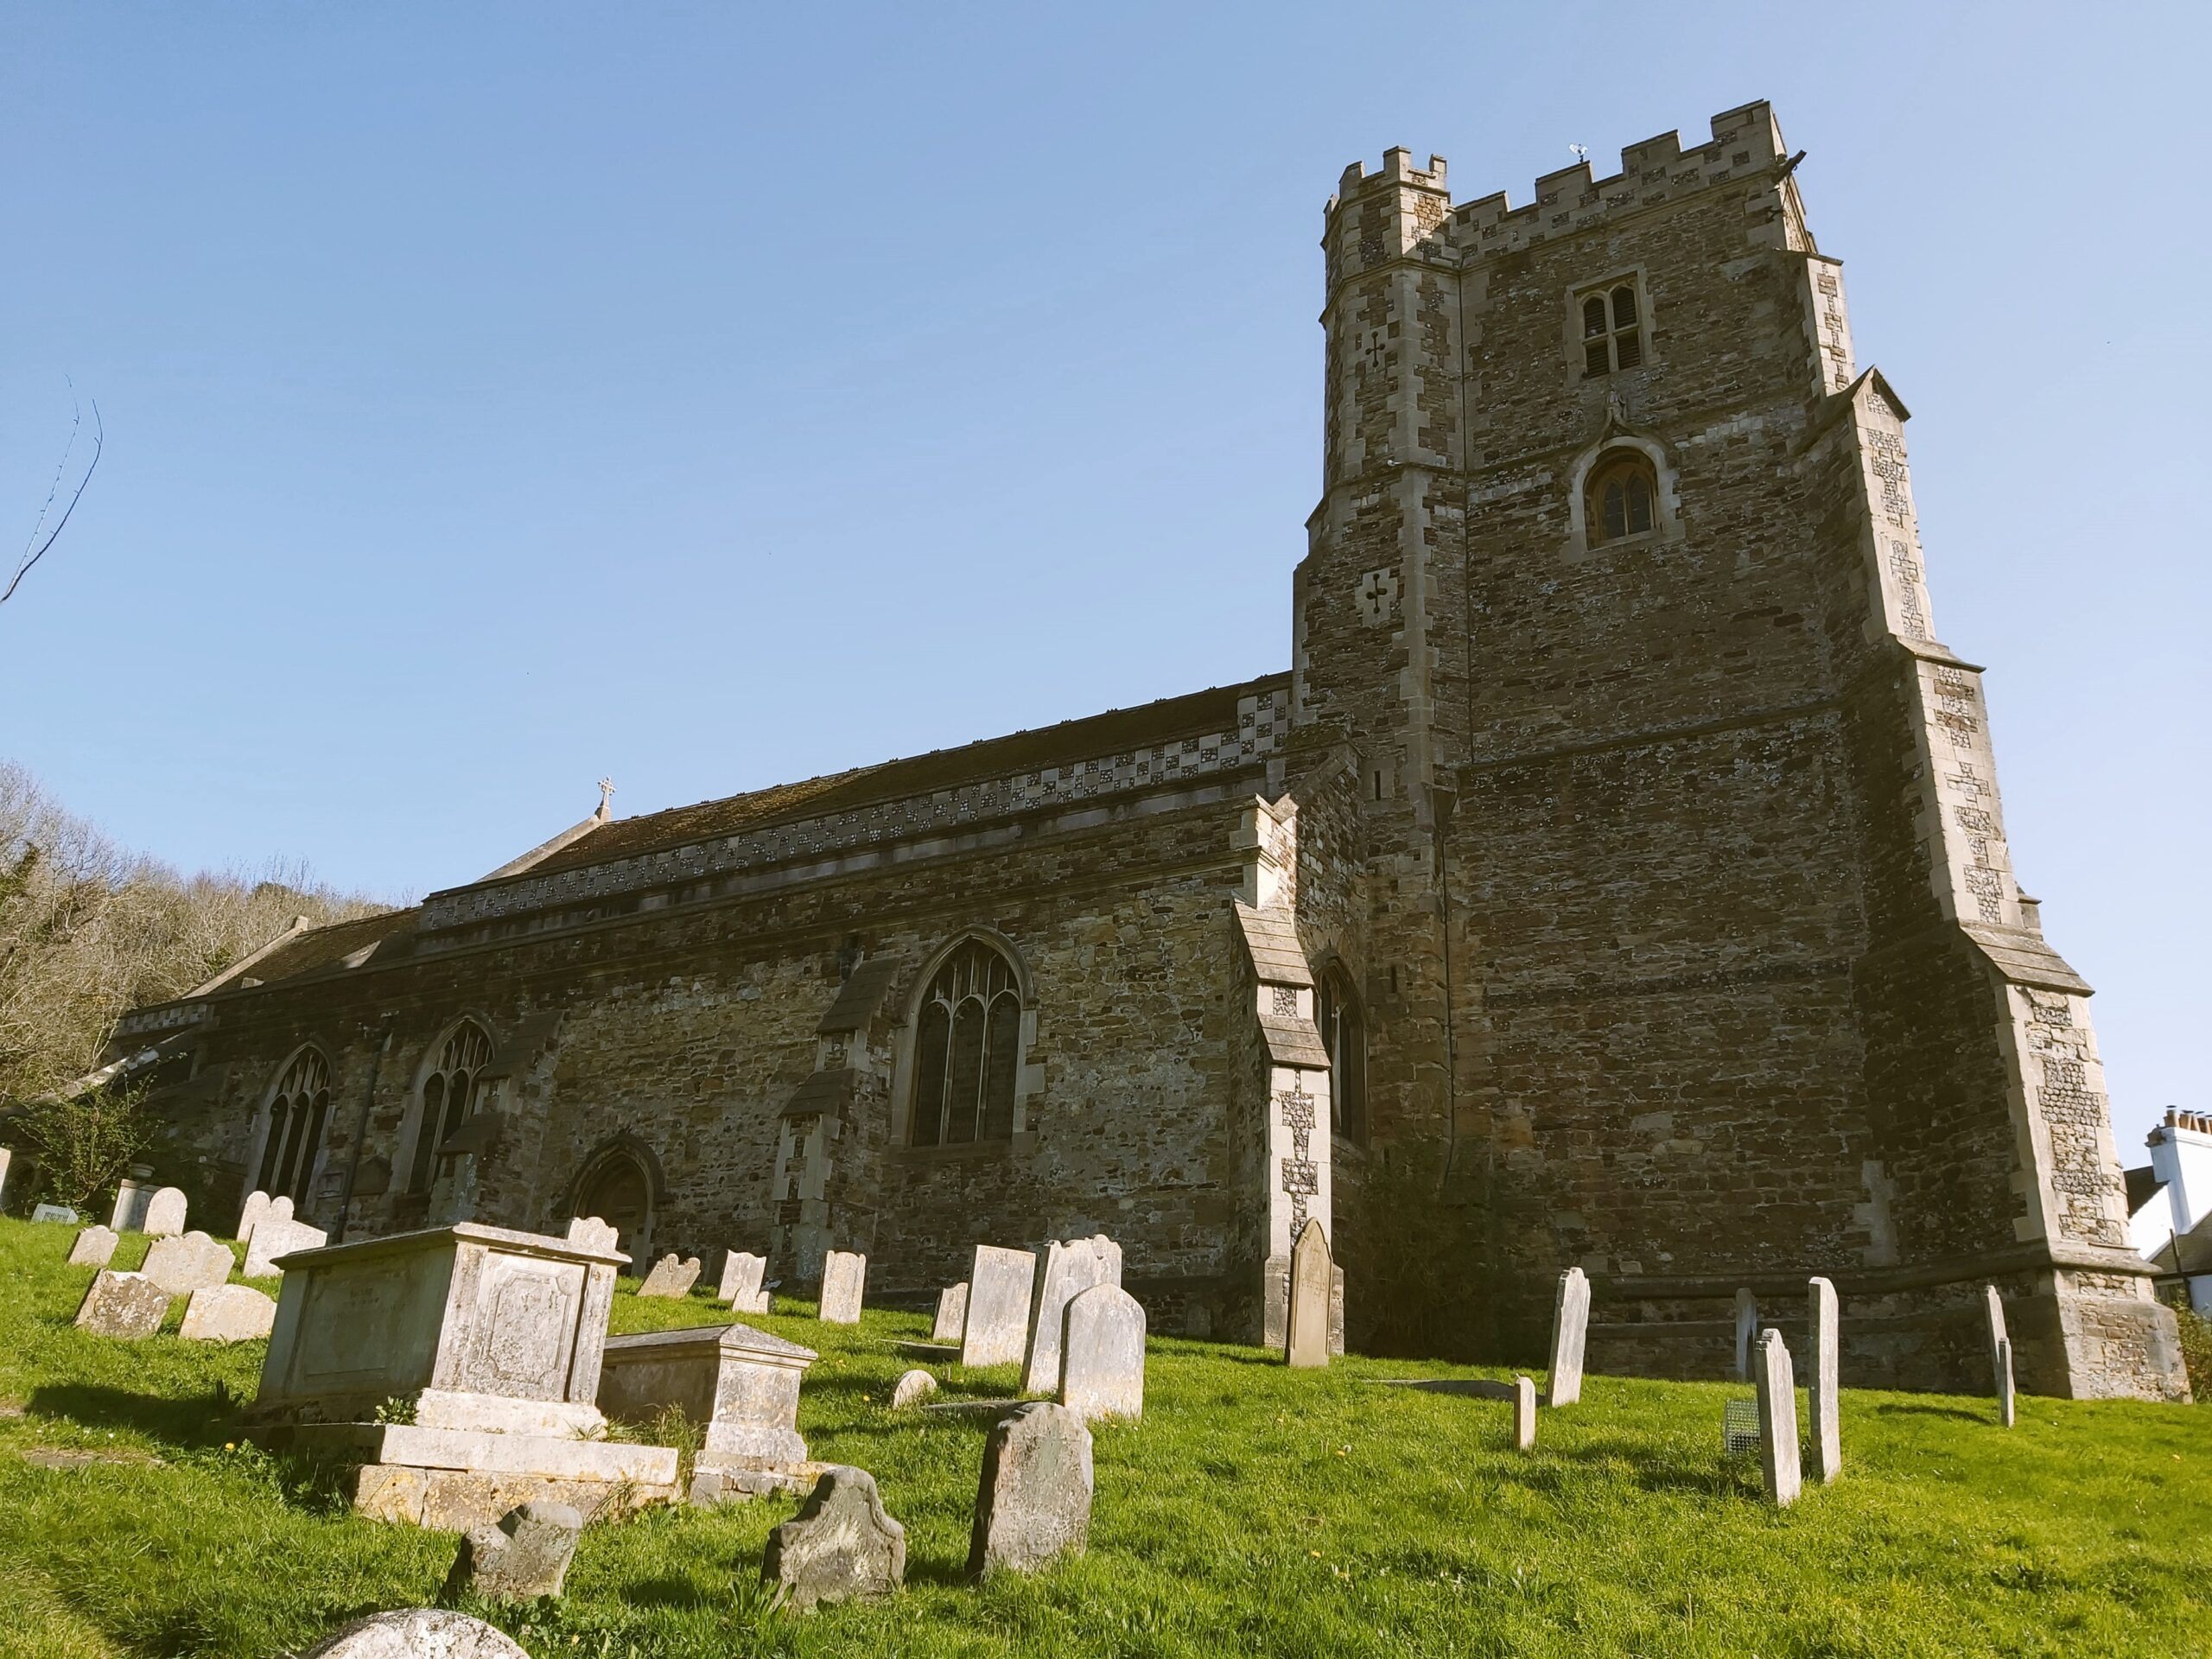 All Saints Church and gravestones in Hastings, England